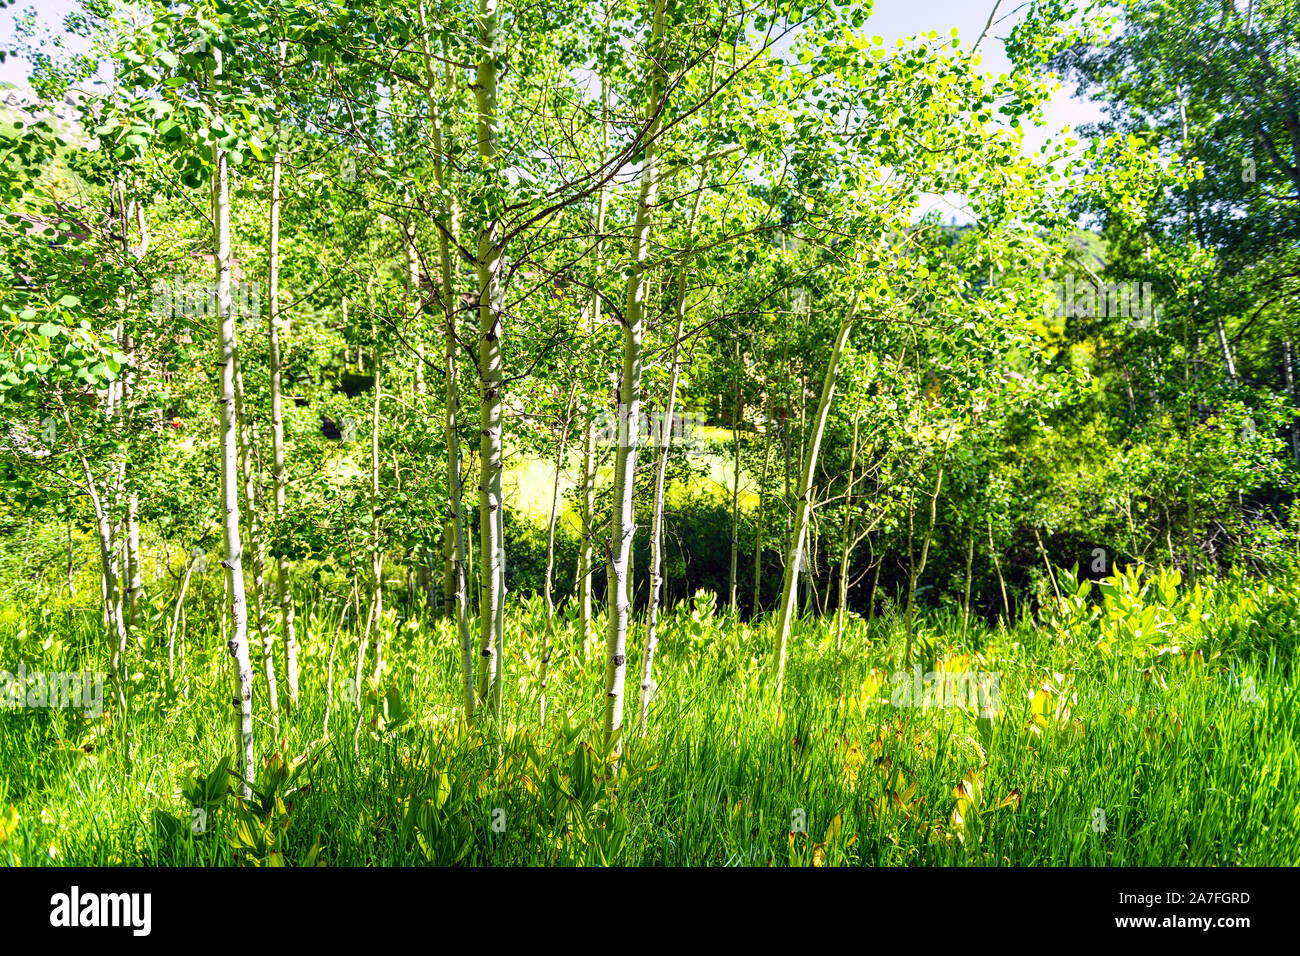 Snowmass Village, Colorado neighborhood with forest of green Aspen trees in summer with sunlight Stock Photo